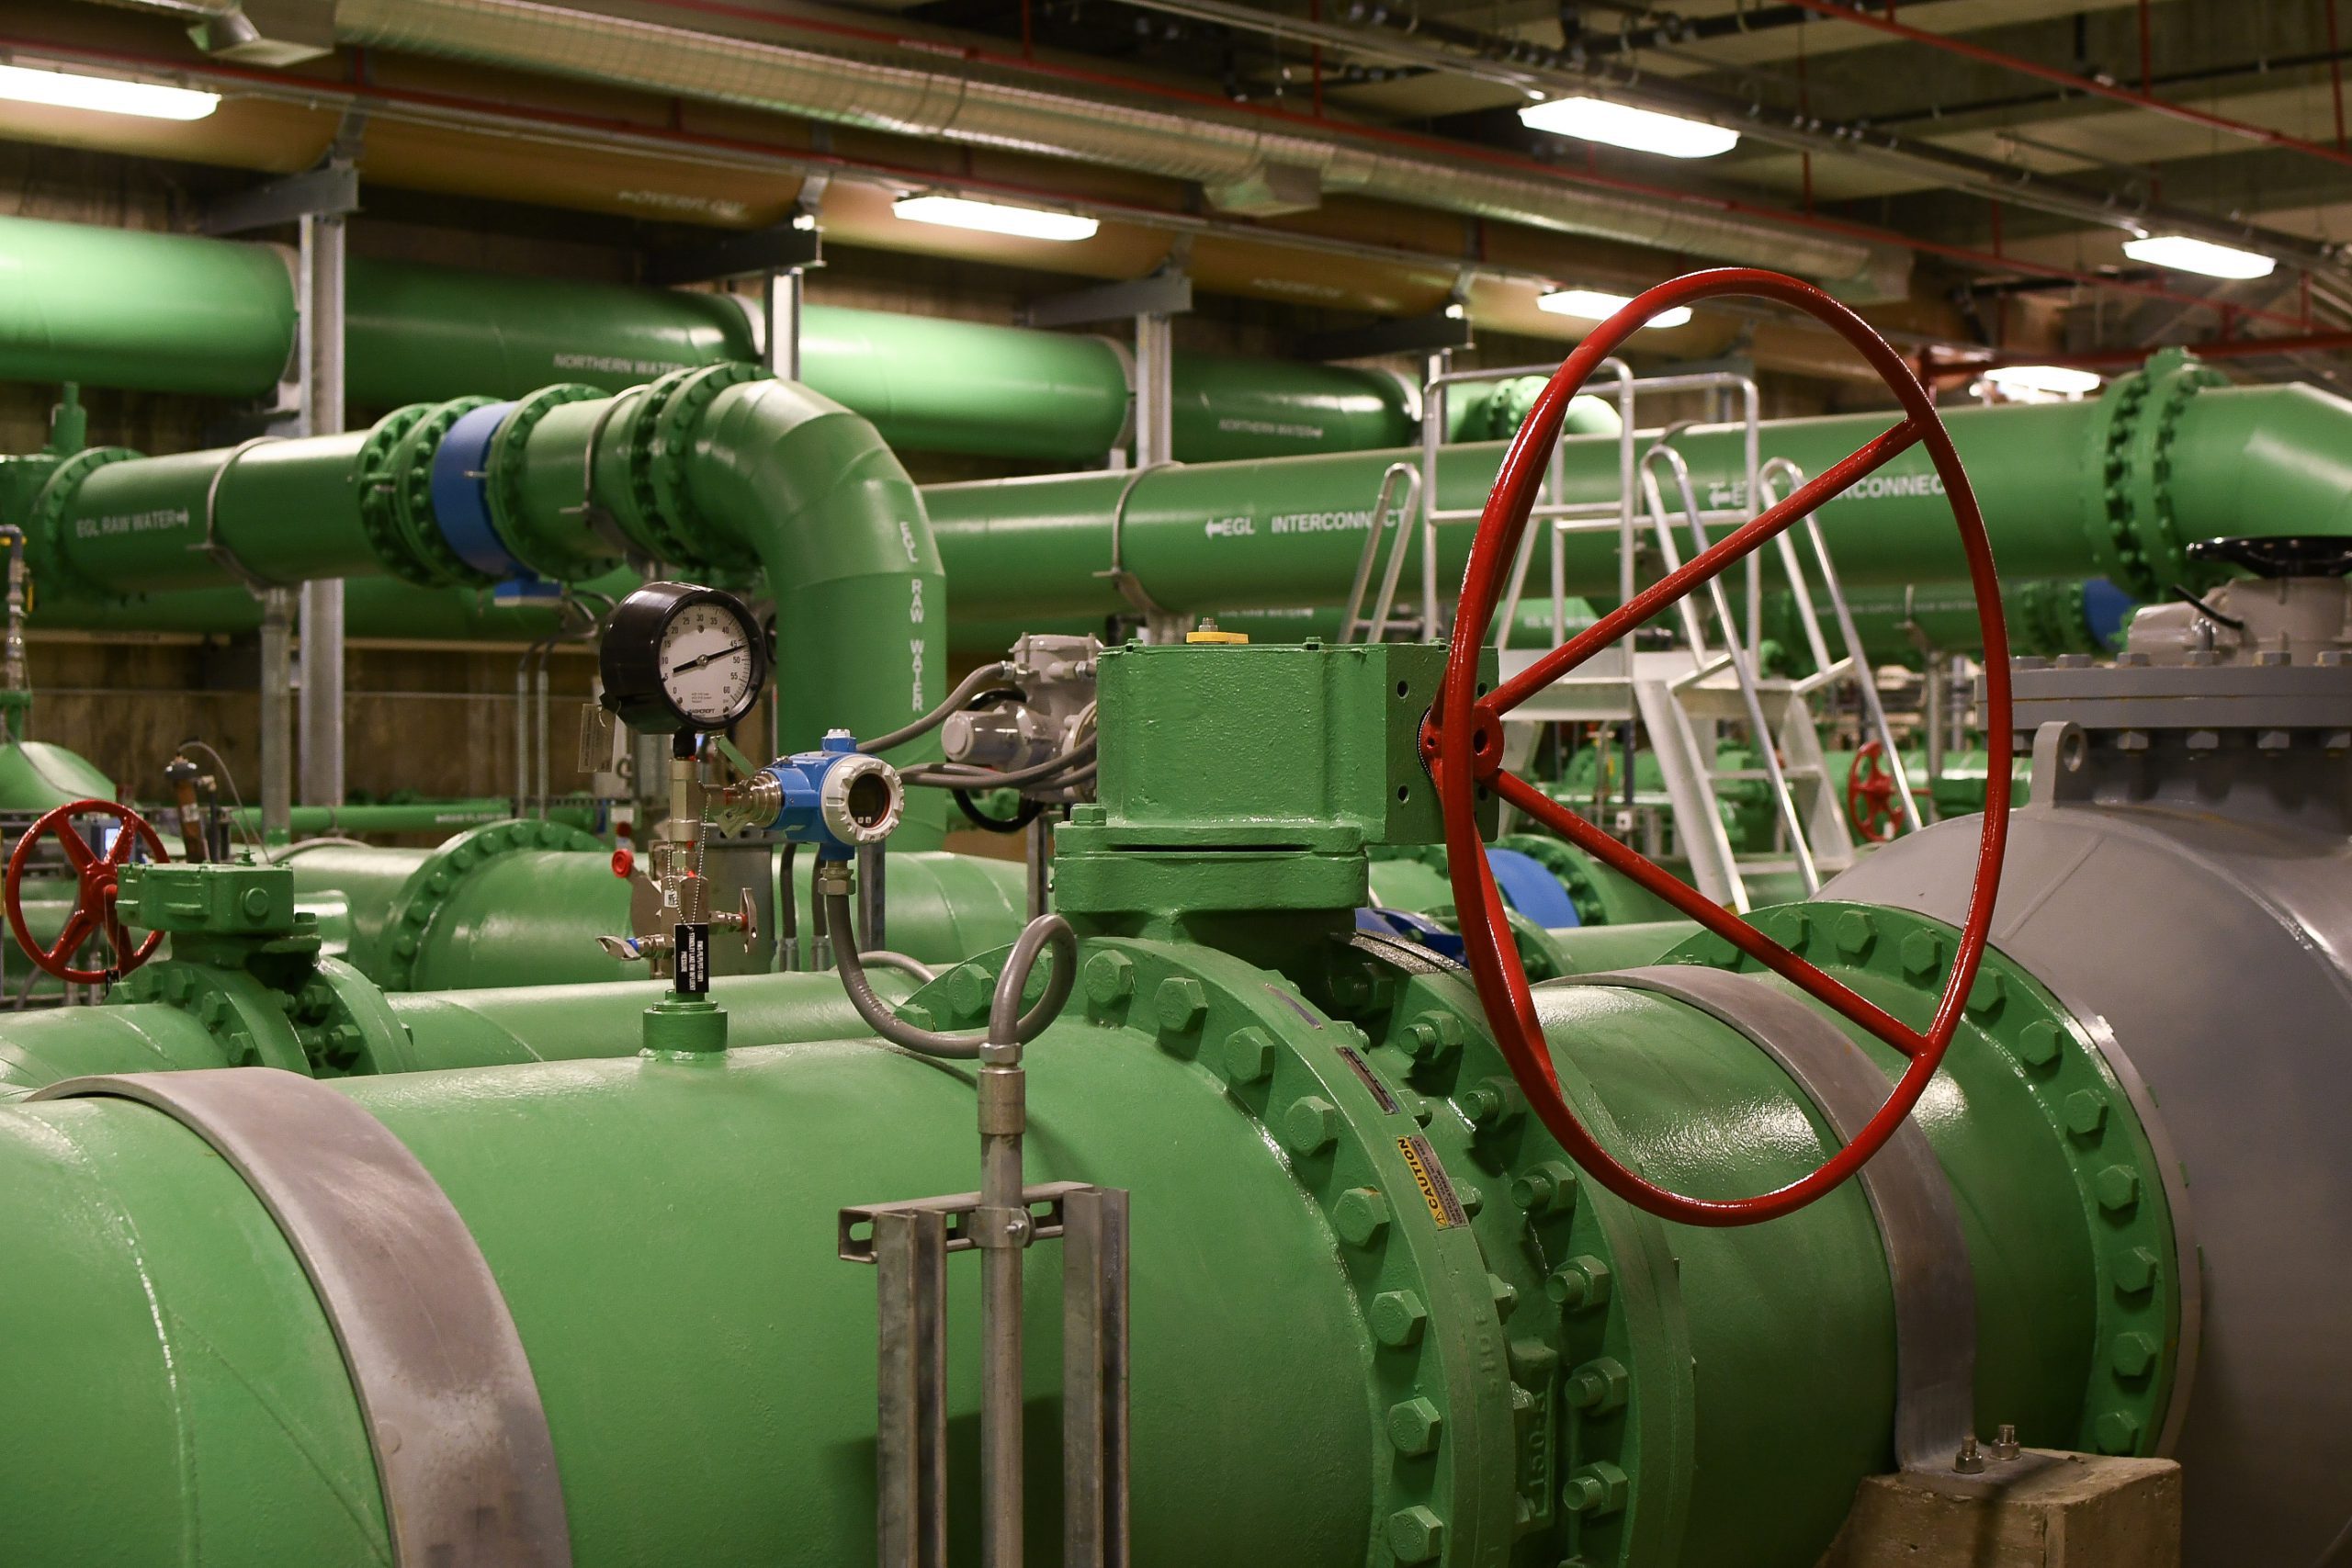 Large, green metal pipes in an indoor facility with large red wheel and measuring gauges.